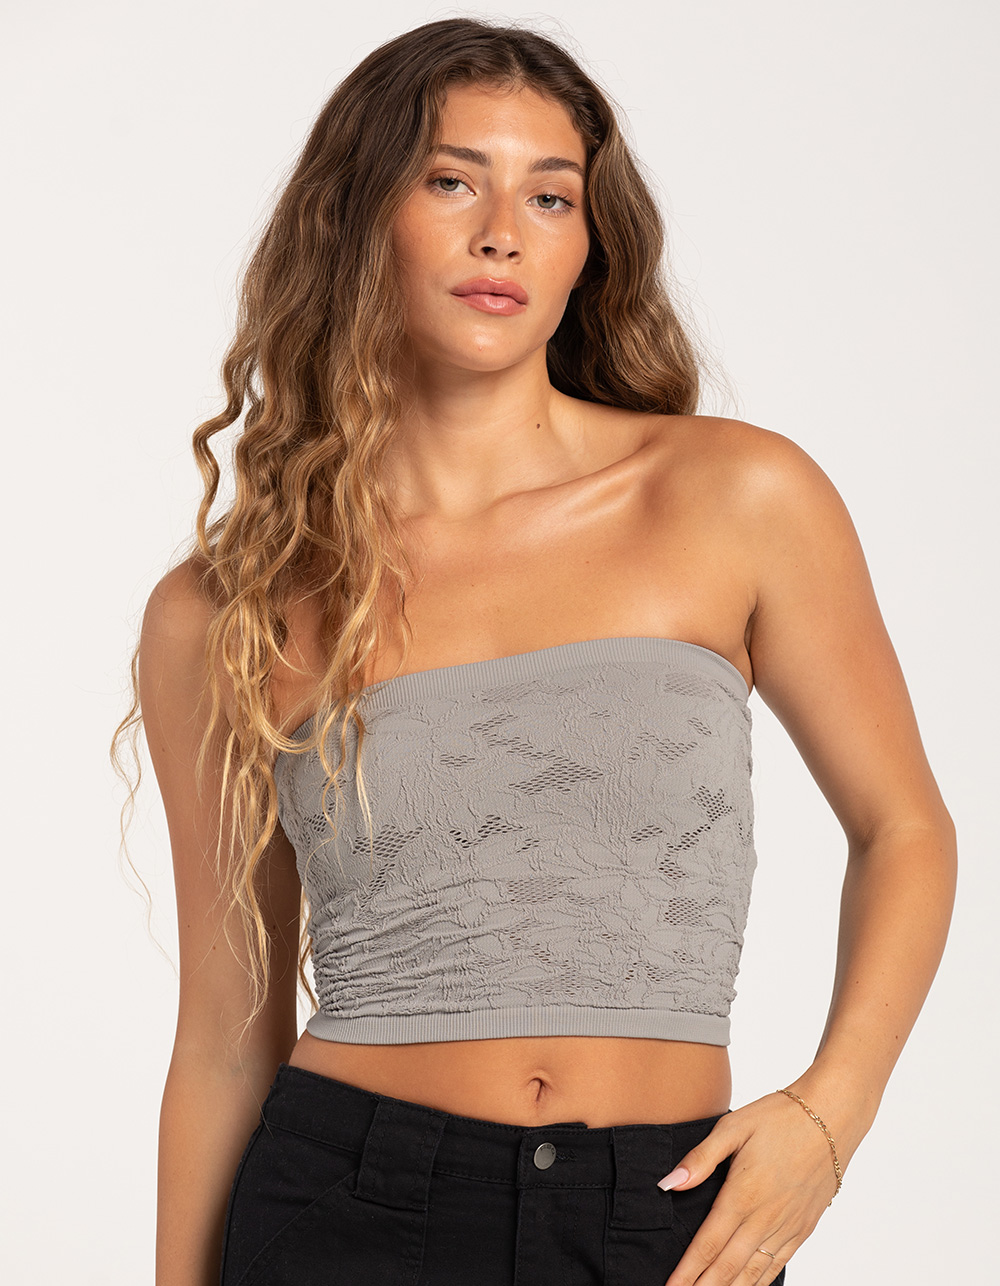 CerbeShops Seamless Textured Lace Womens Tube Top